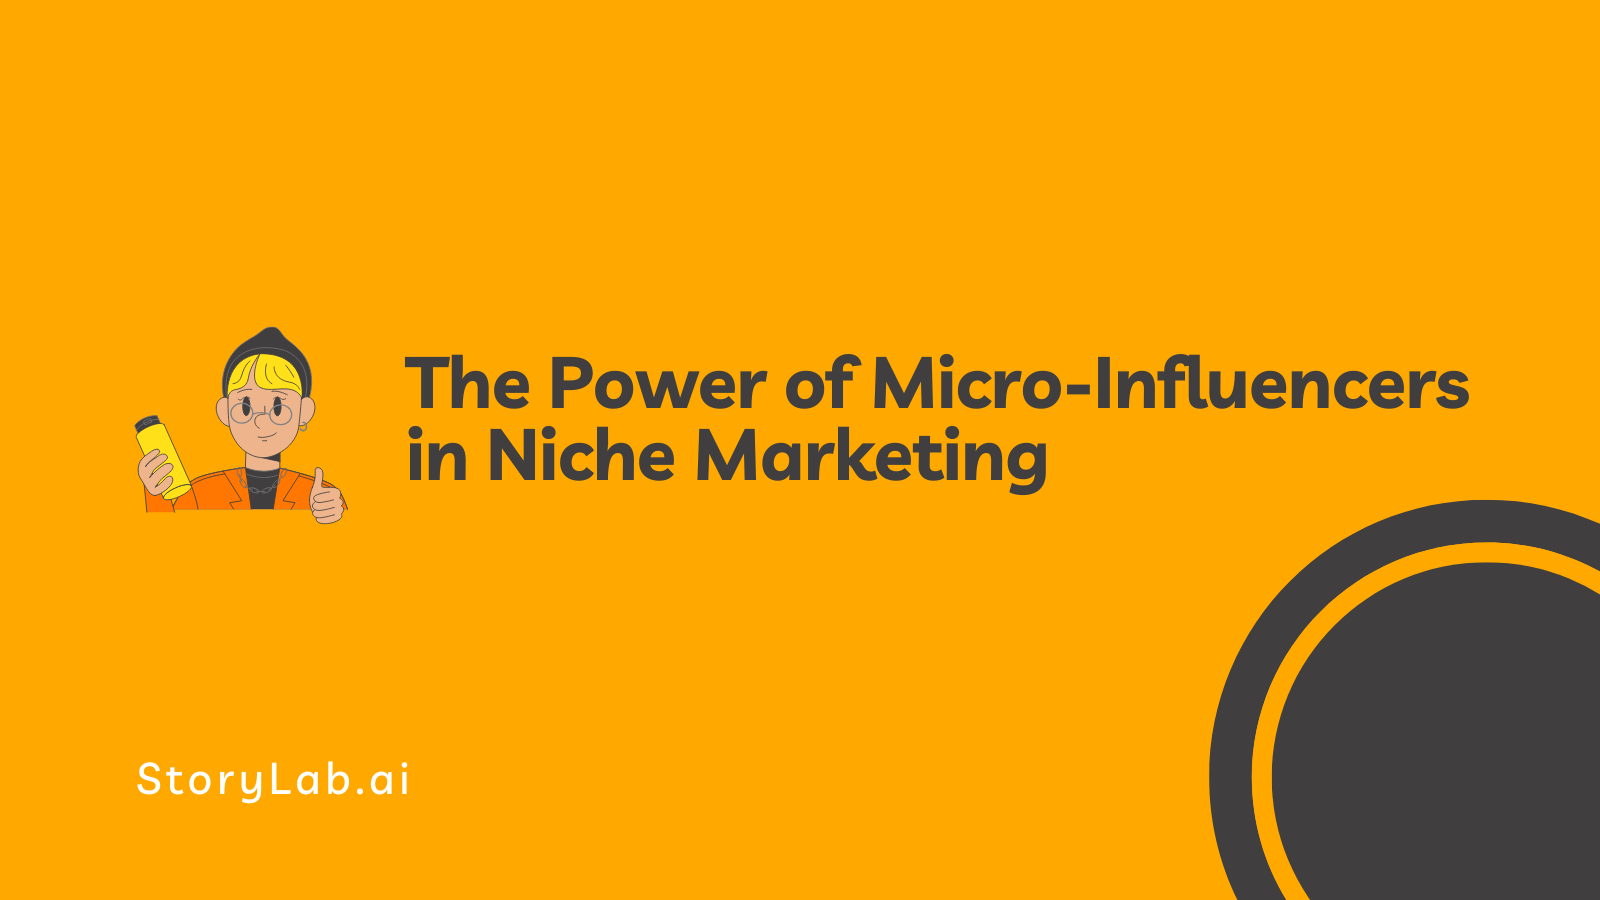 The Power of Micro-Influencers in Niche Marketing